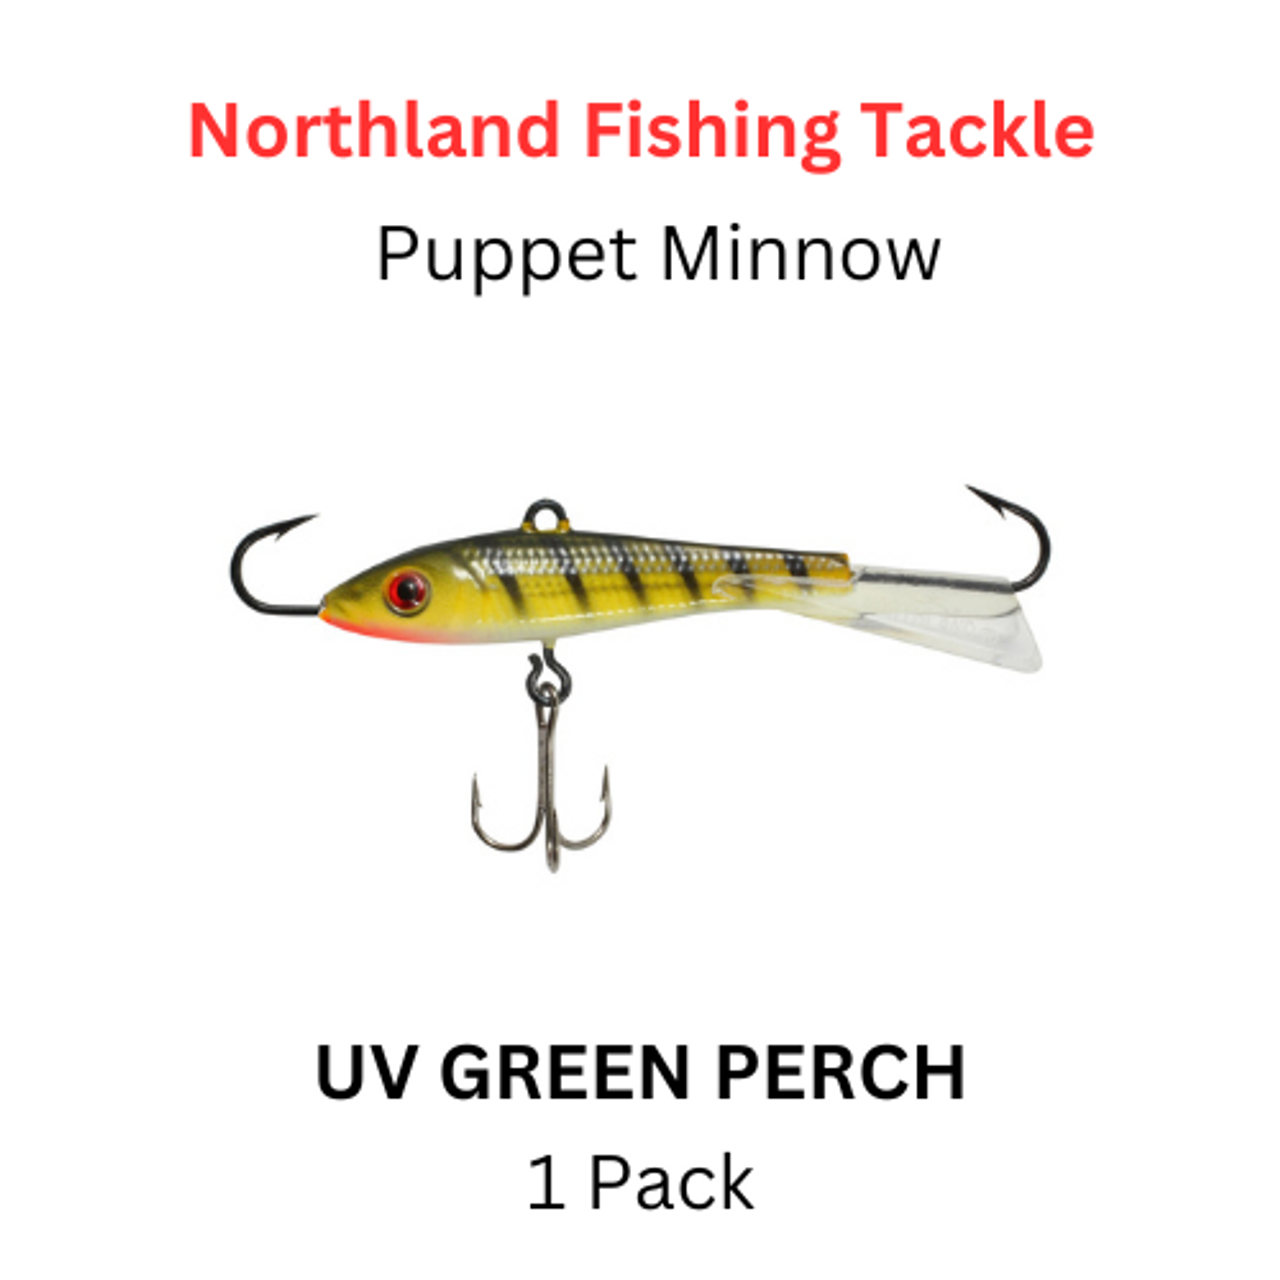 https://cdn11.bigcommerce.com/s-u9nbd/images/stencil/1280x1280/products/6194/15643/Northland_Fishing_Tackle_Puppet_Minnow_UV_GREEN_PERCH__05663.1676751265.png?c=2